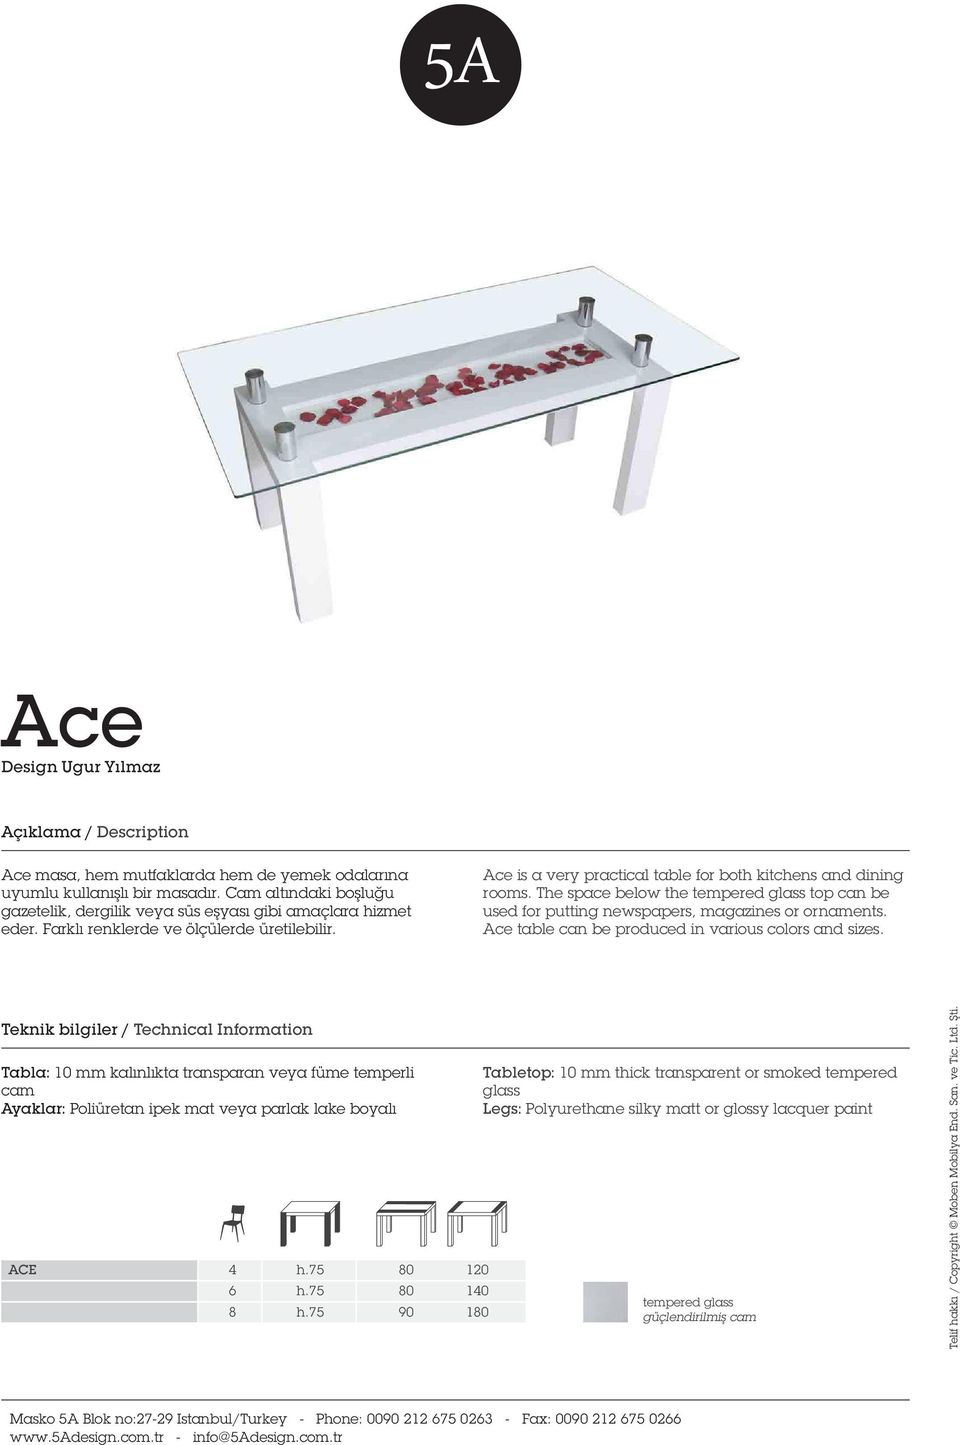 The space below the tempered glass top can be used for putting newspapers, magazines or ornaments. Ace table can be produced in various colors and sizes.